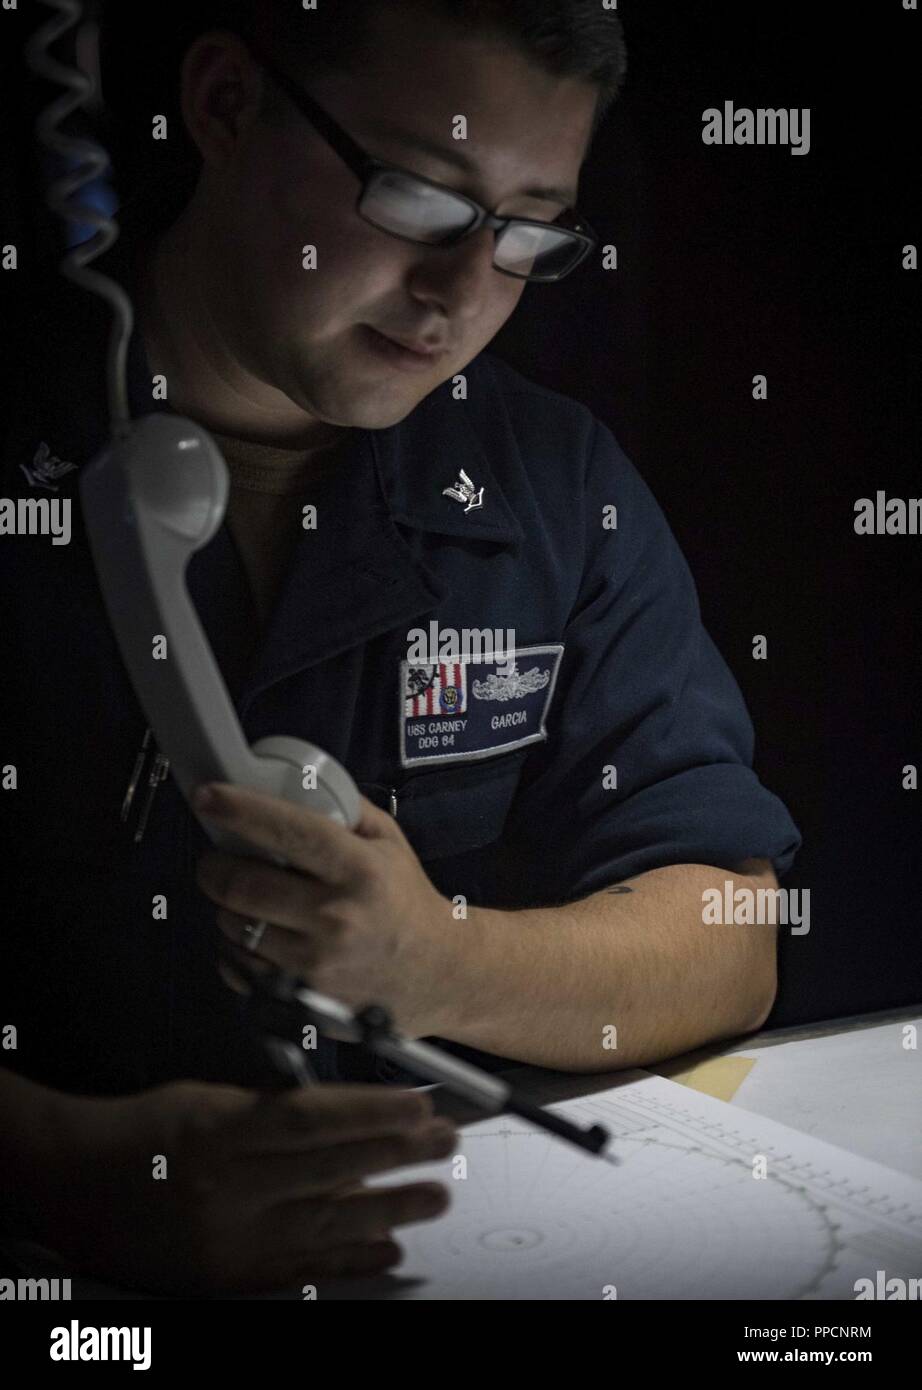 SEA (Sept. 4, 2018) Operations Specialist 3rd Class James Garcia stands watch in the combat information center aboard the Arleigh Burke-class guided-missile destroyer USS Carney (DDG 64), Sept. 4, 2018. Carney, forward-deployed to Rota, Spain, is on its fifth patrol in the U.S. 6th Fleet area of operations in support of regional allies and partners as well as U.S. national security interests in Europe and Africa. Stock Photo